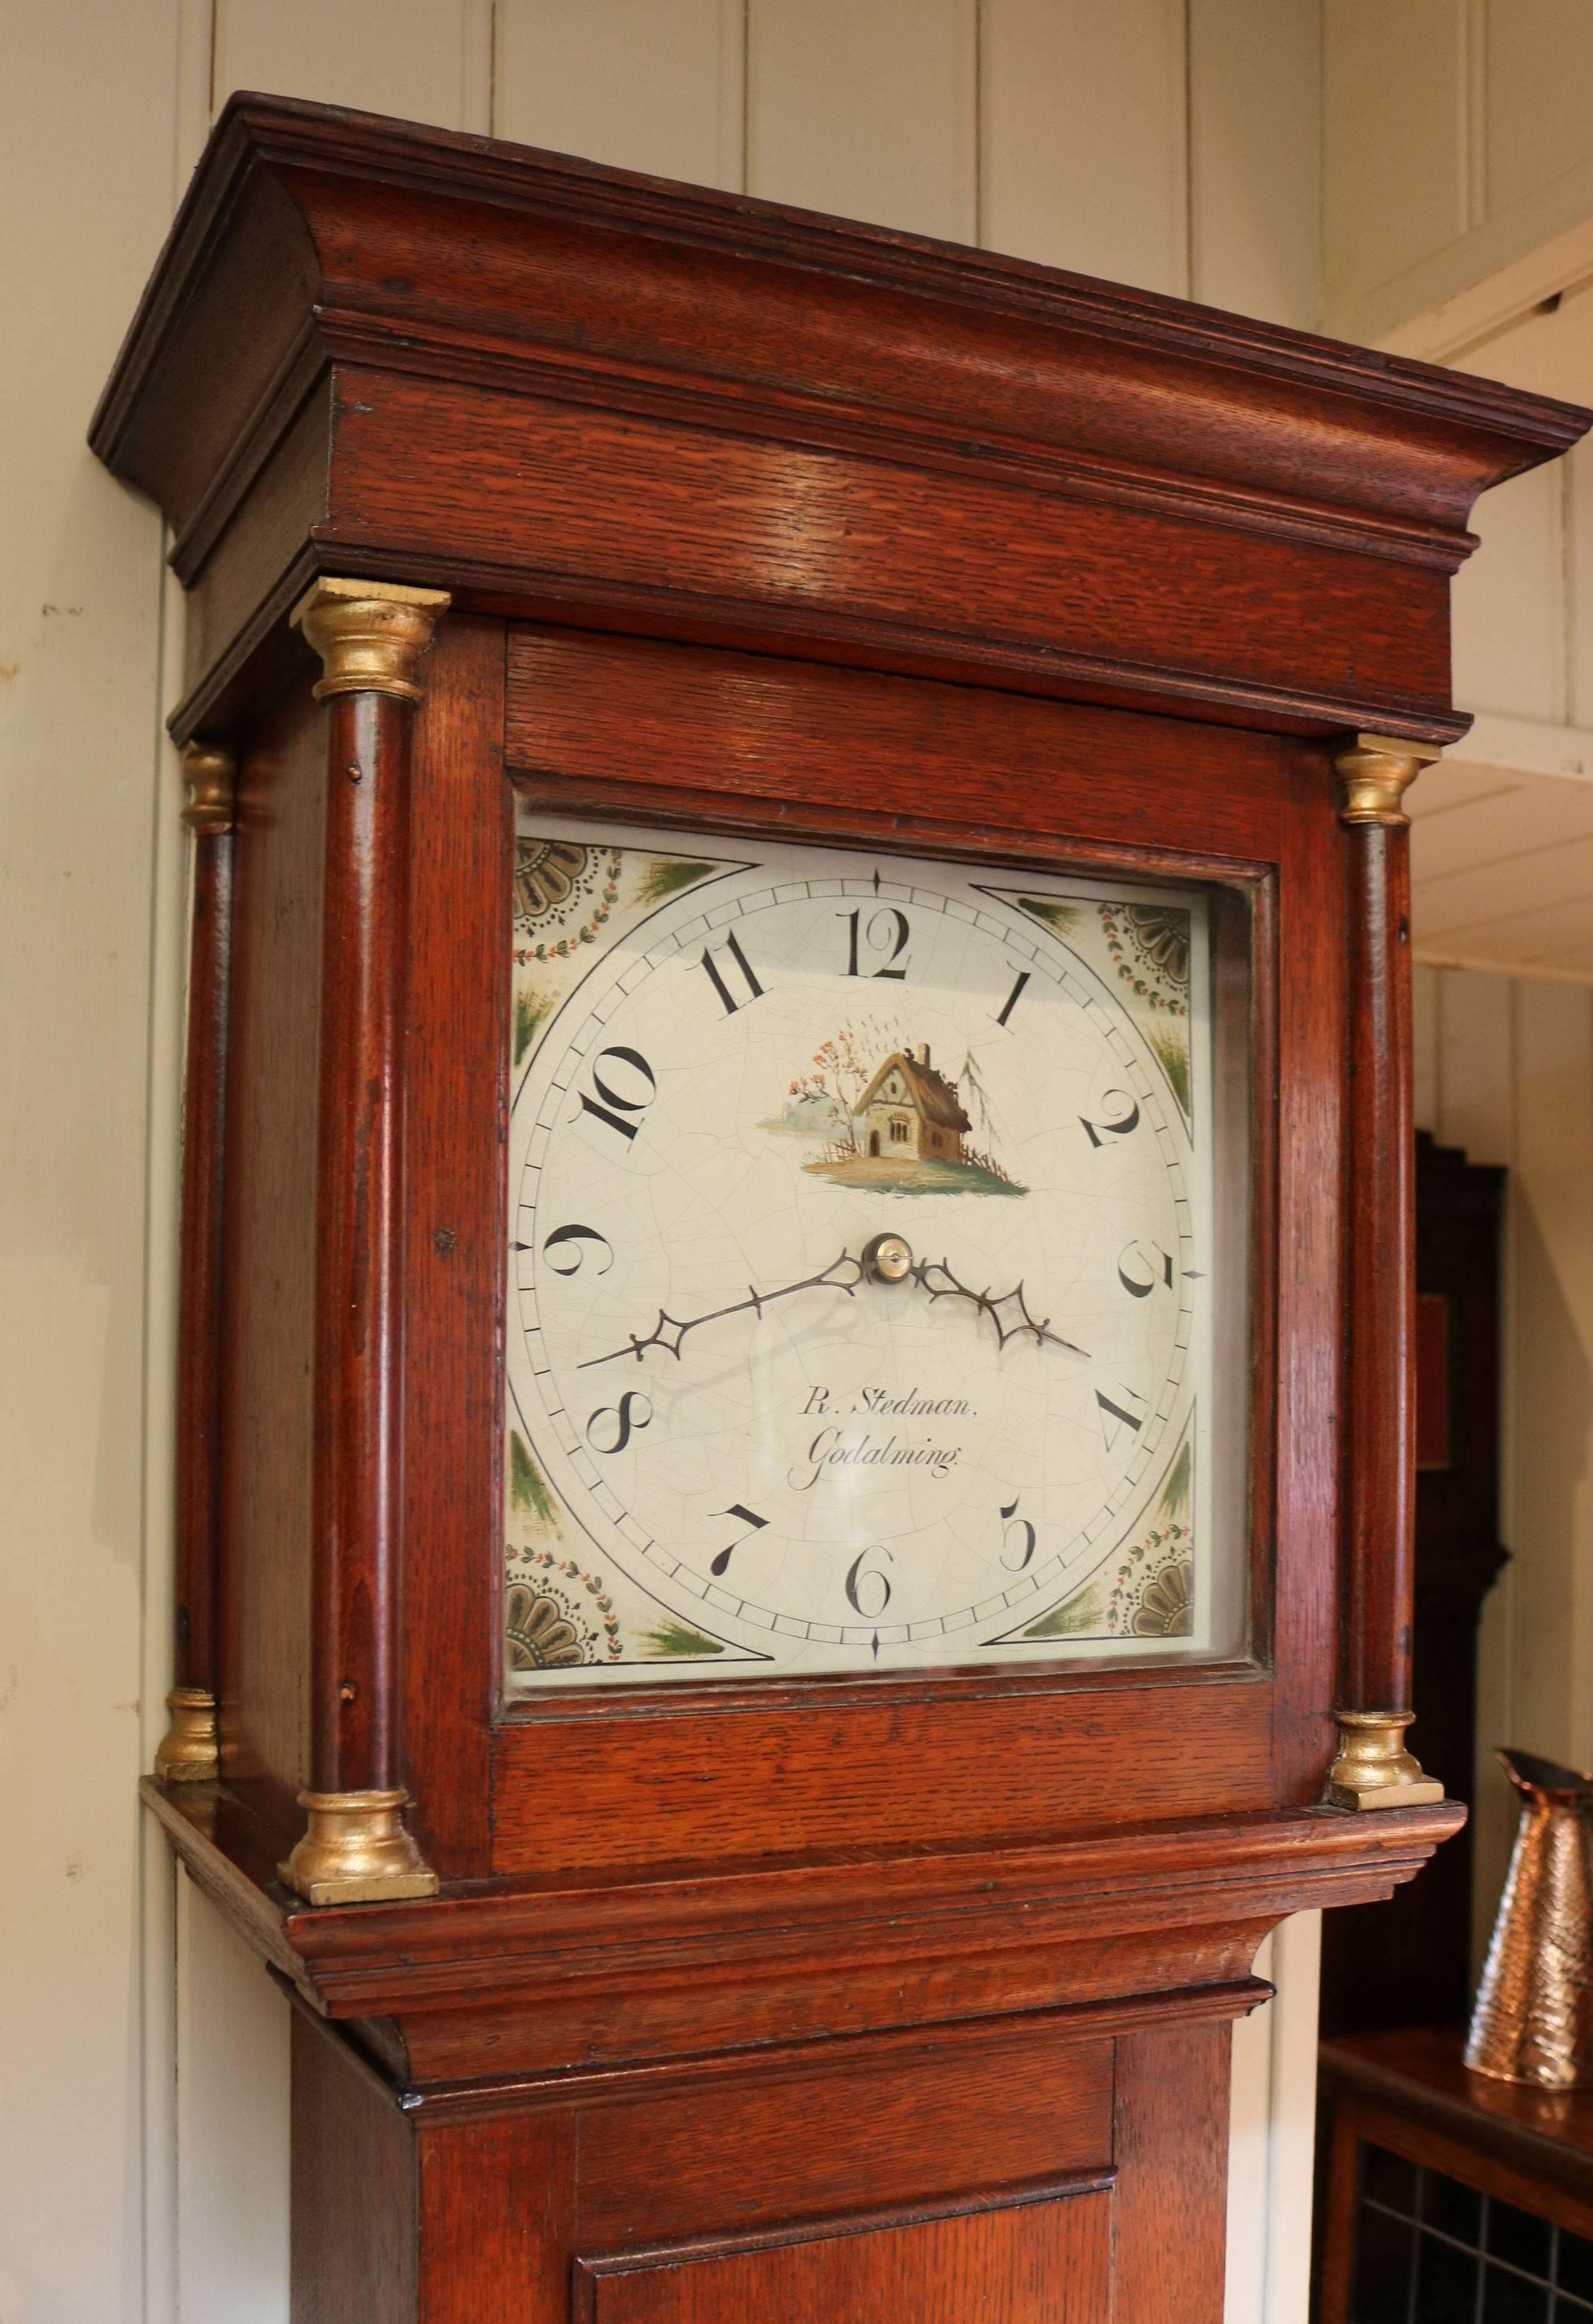 An nice original solid oak country longcase clock of simple form. It has a flat top, hood side pillars and a long door. The 11